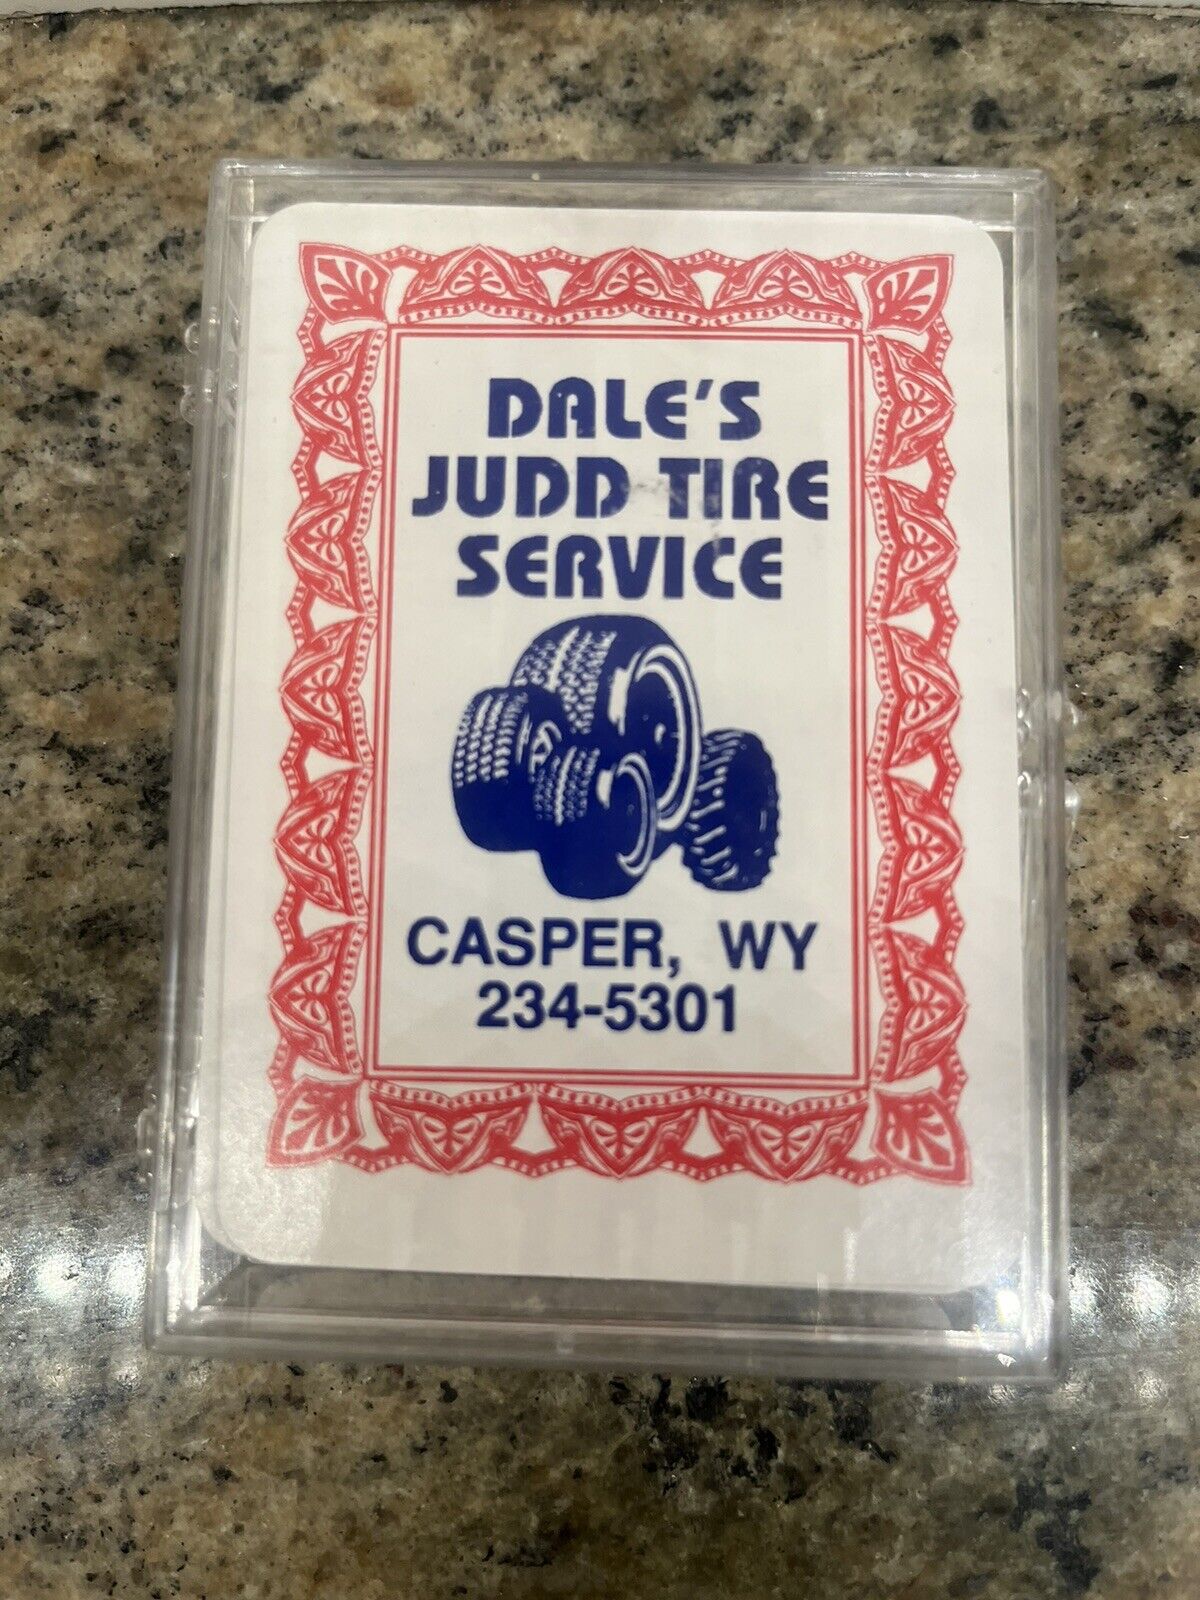 dales judd tire service casper wy playing cards Vtg